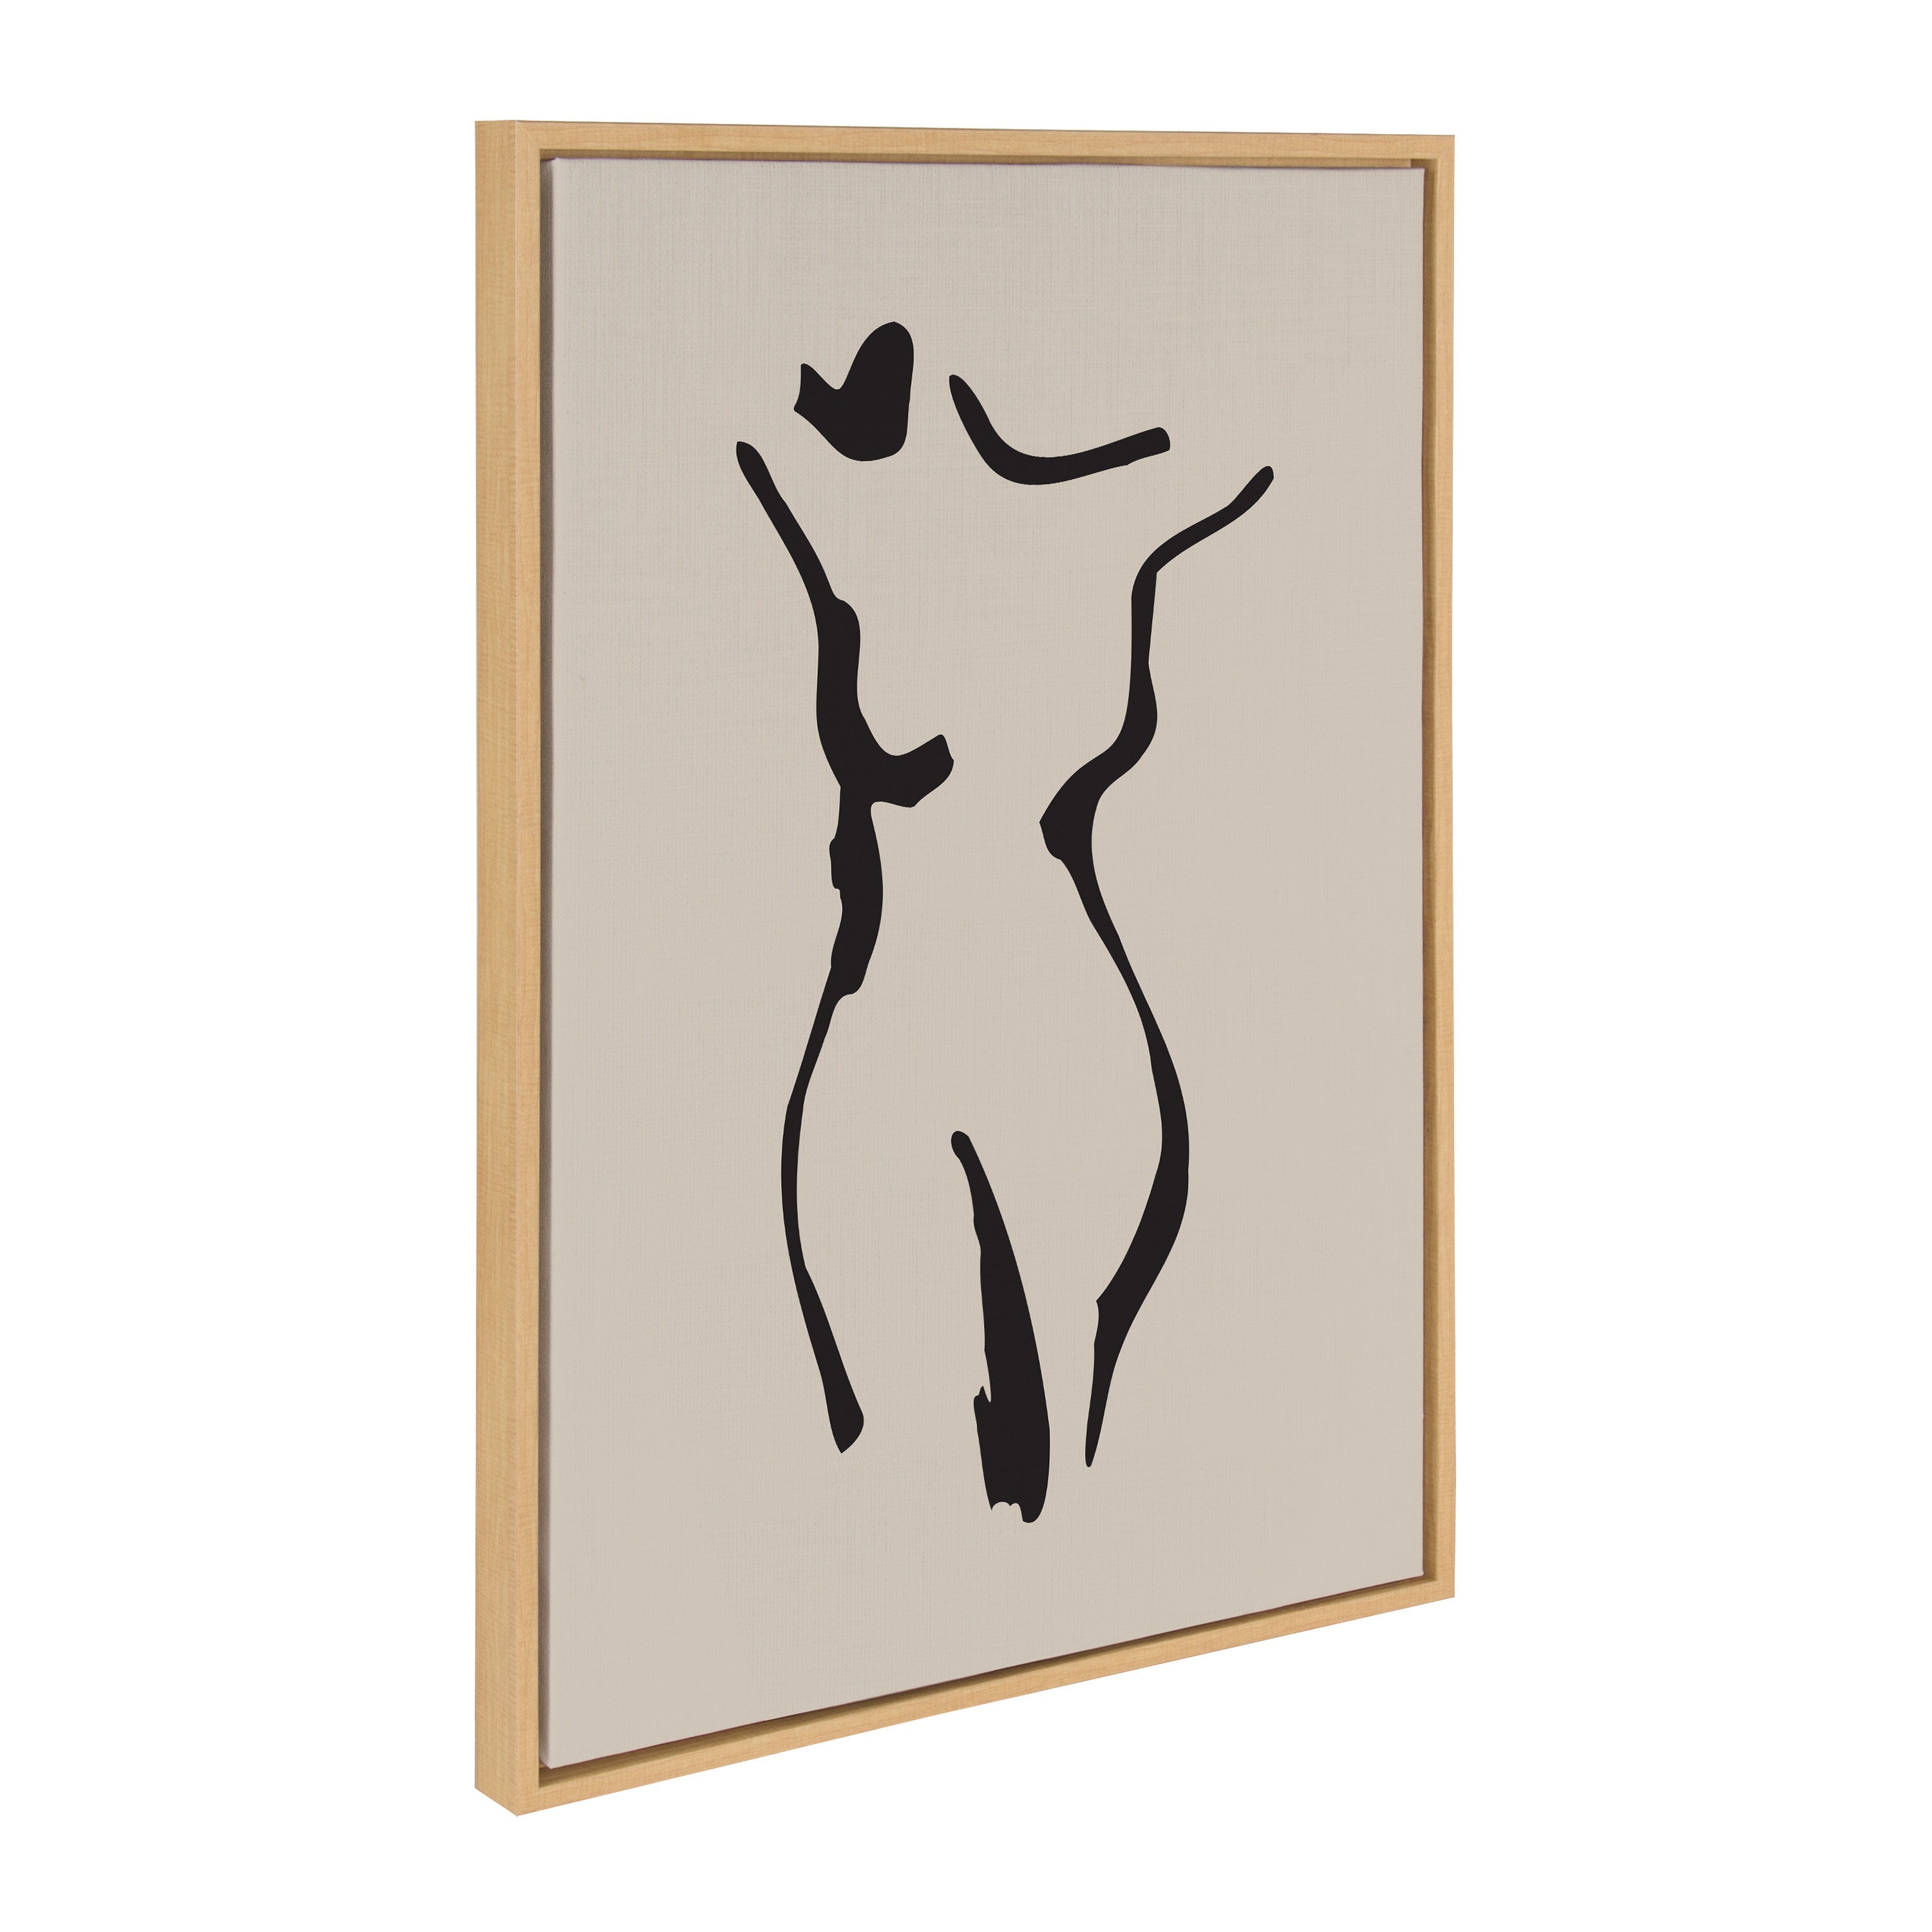 Sylvie Minimalist Neutral Line Art Drawing Body Framed Canvas by The Creative Bunch Studio